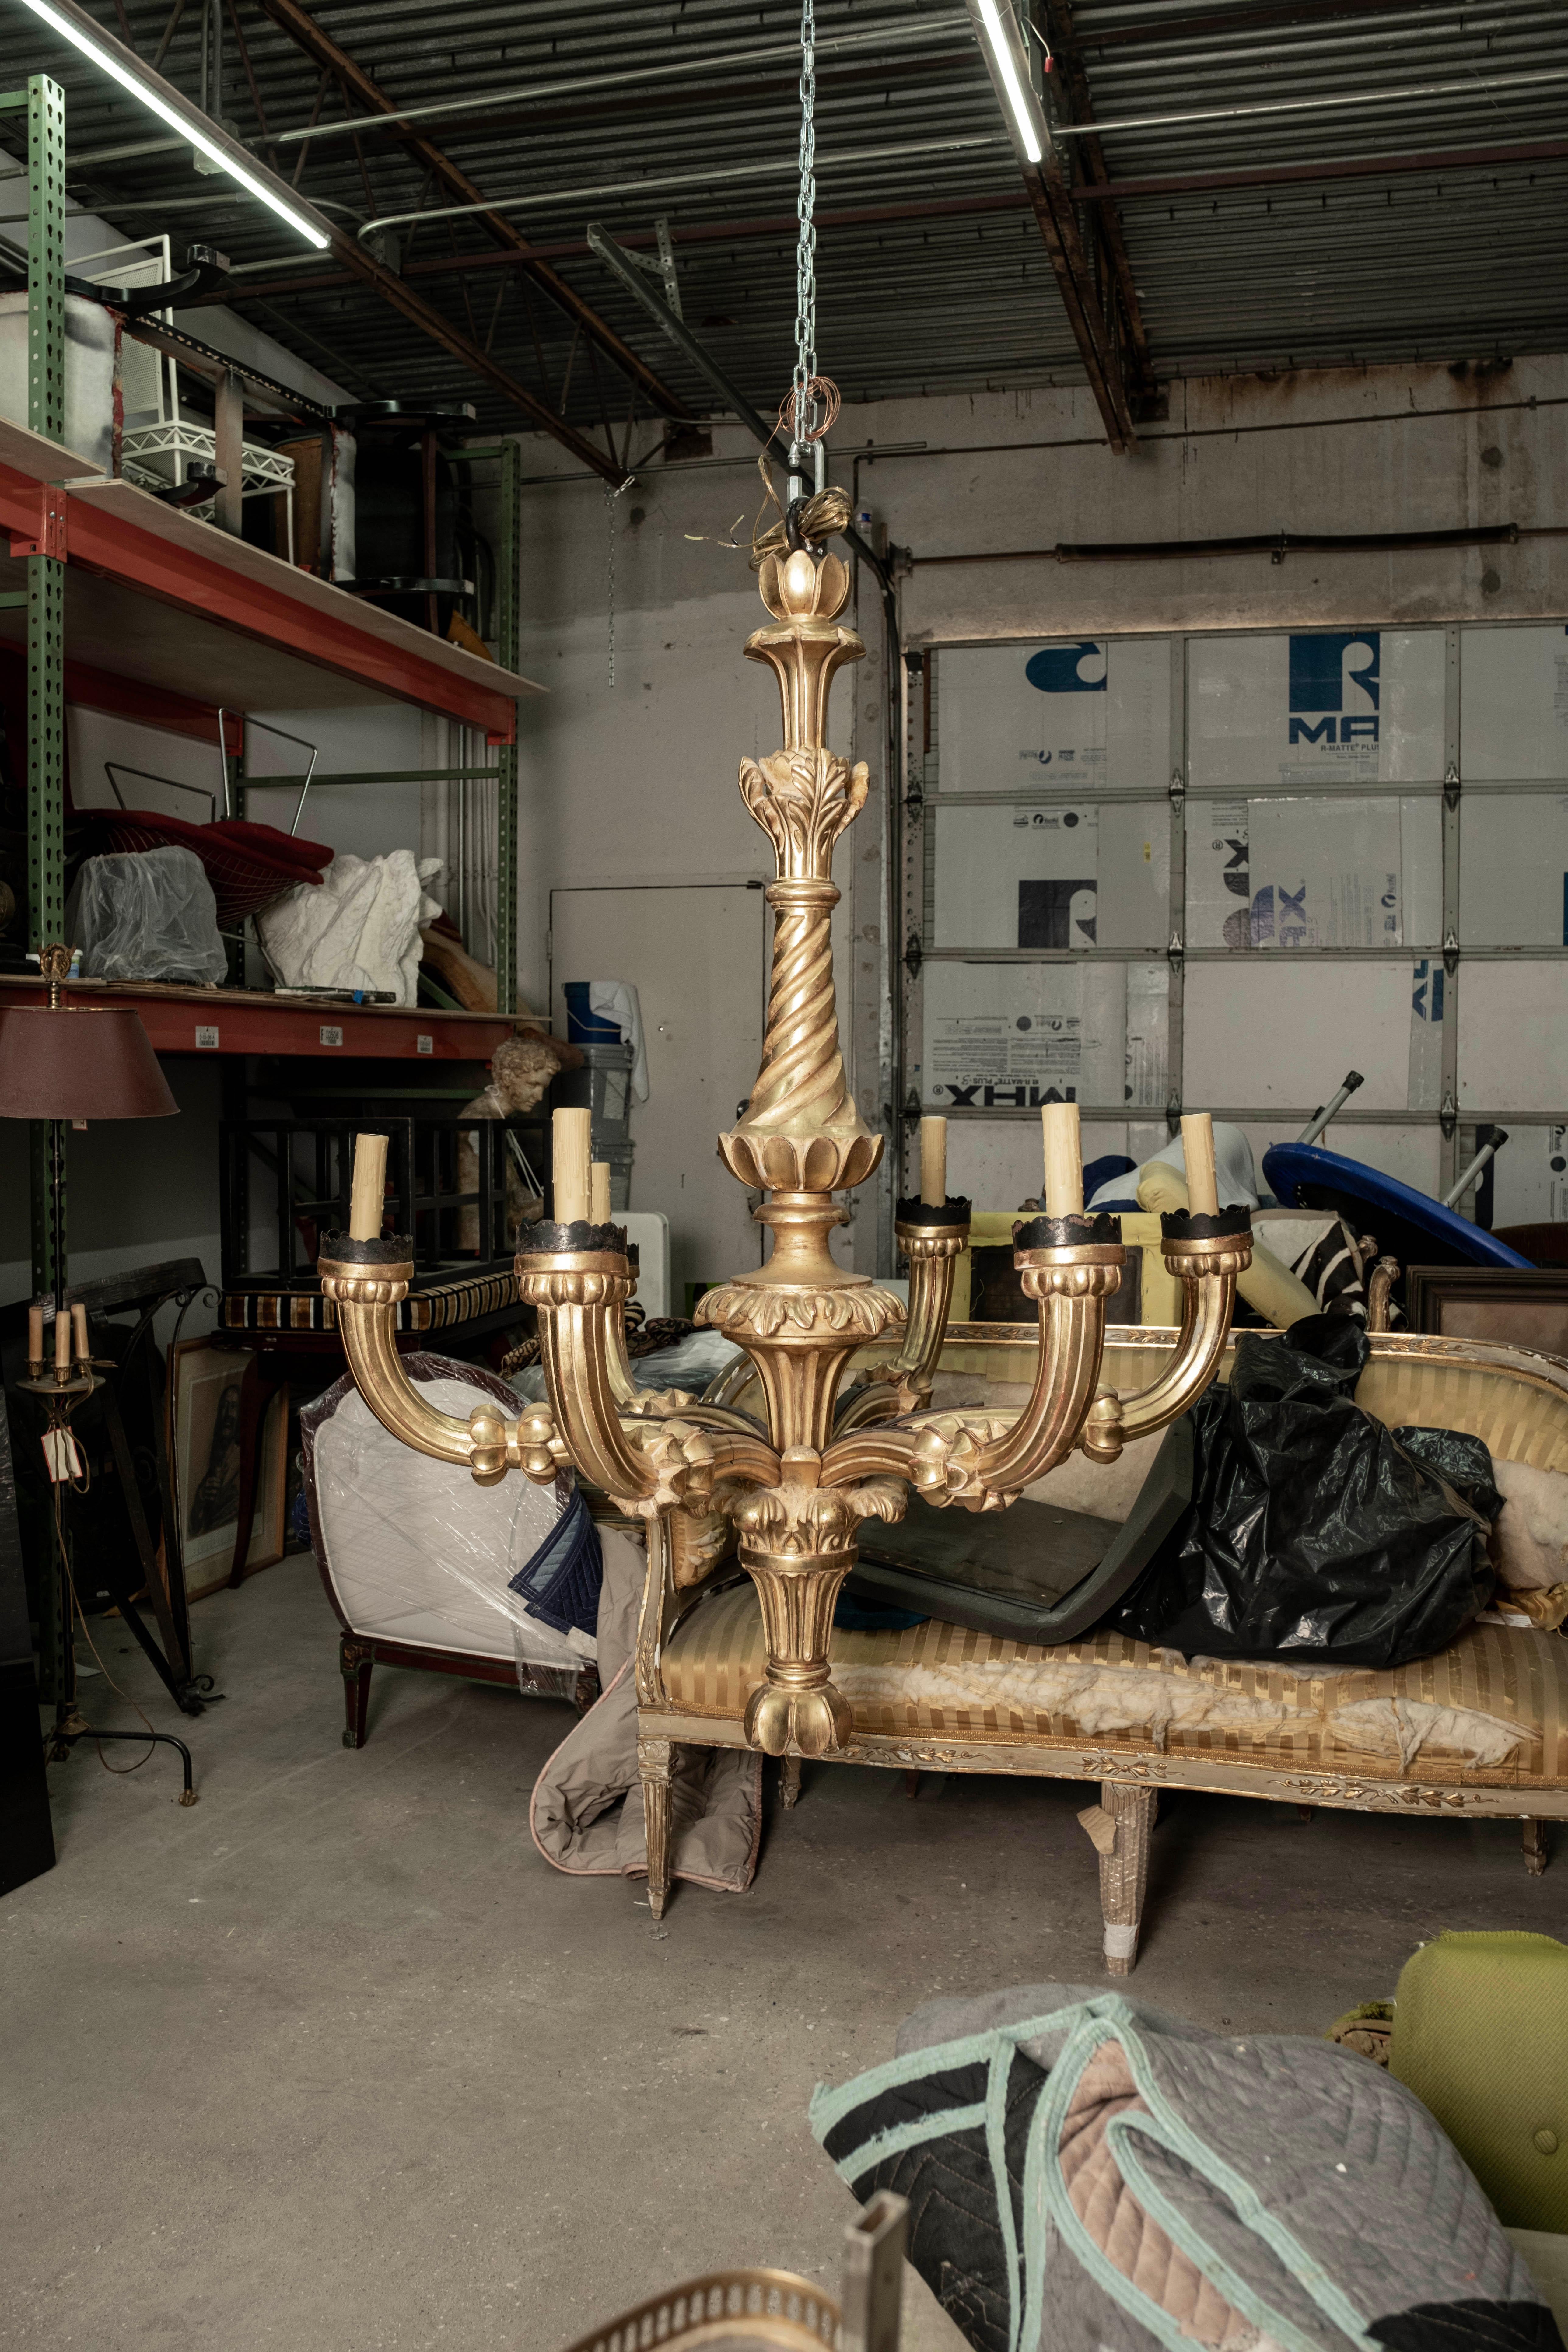 Monumental 19th century Italian giltwood chandelier. This stunning magnificent large scale Italian gilt wood six light Baroque style chandelier from Tuscany has fabulous patina and has been newly wired with new sockets for the U.S. market including